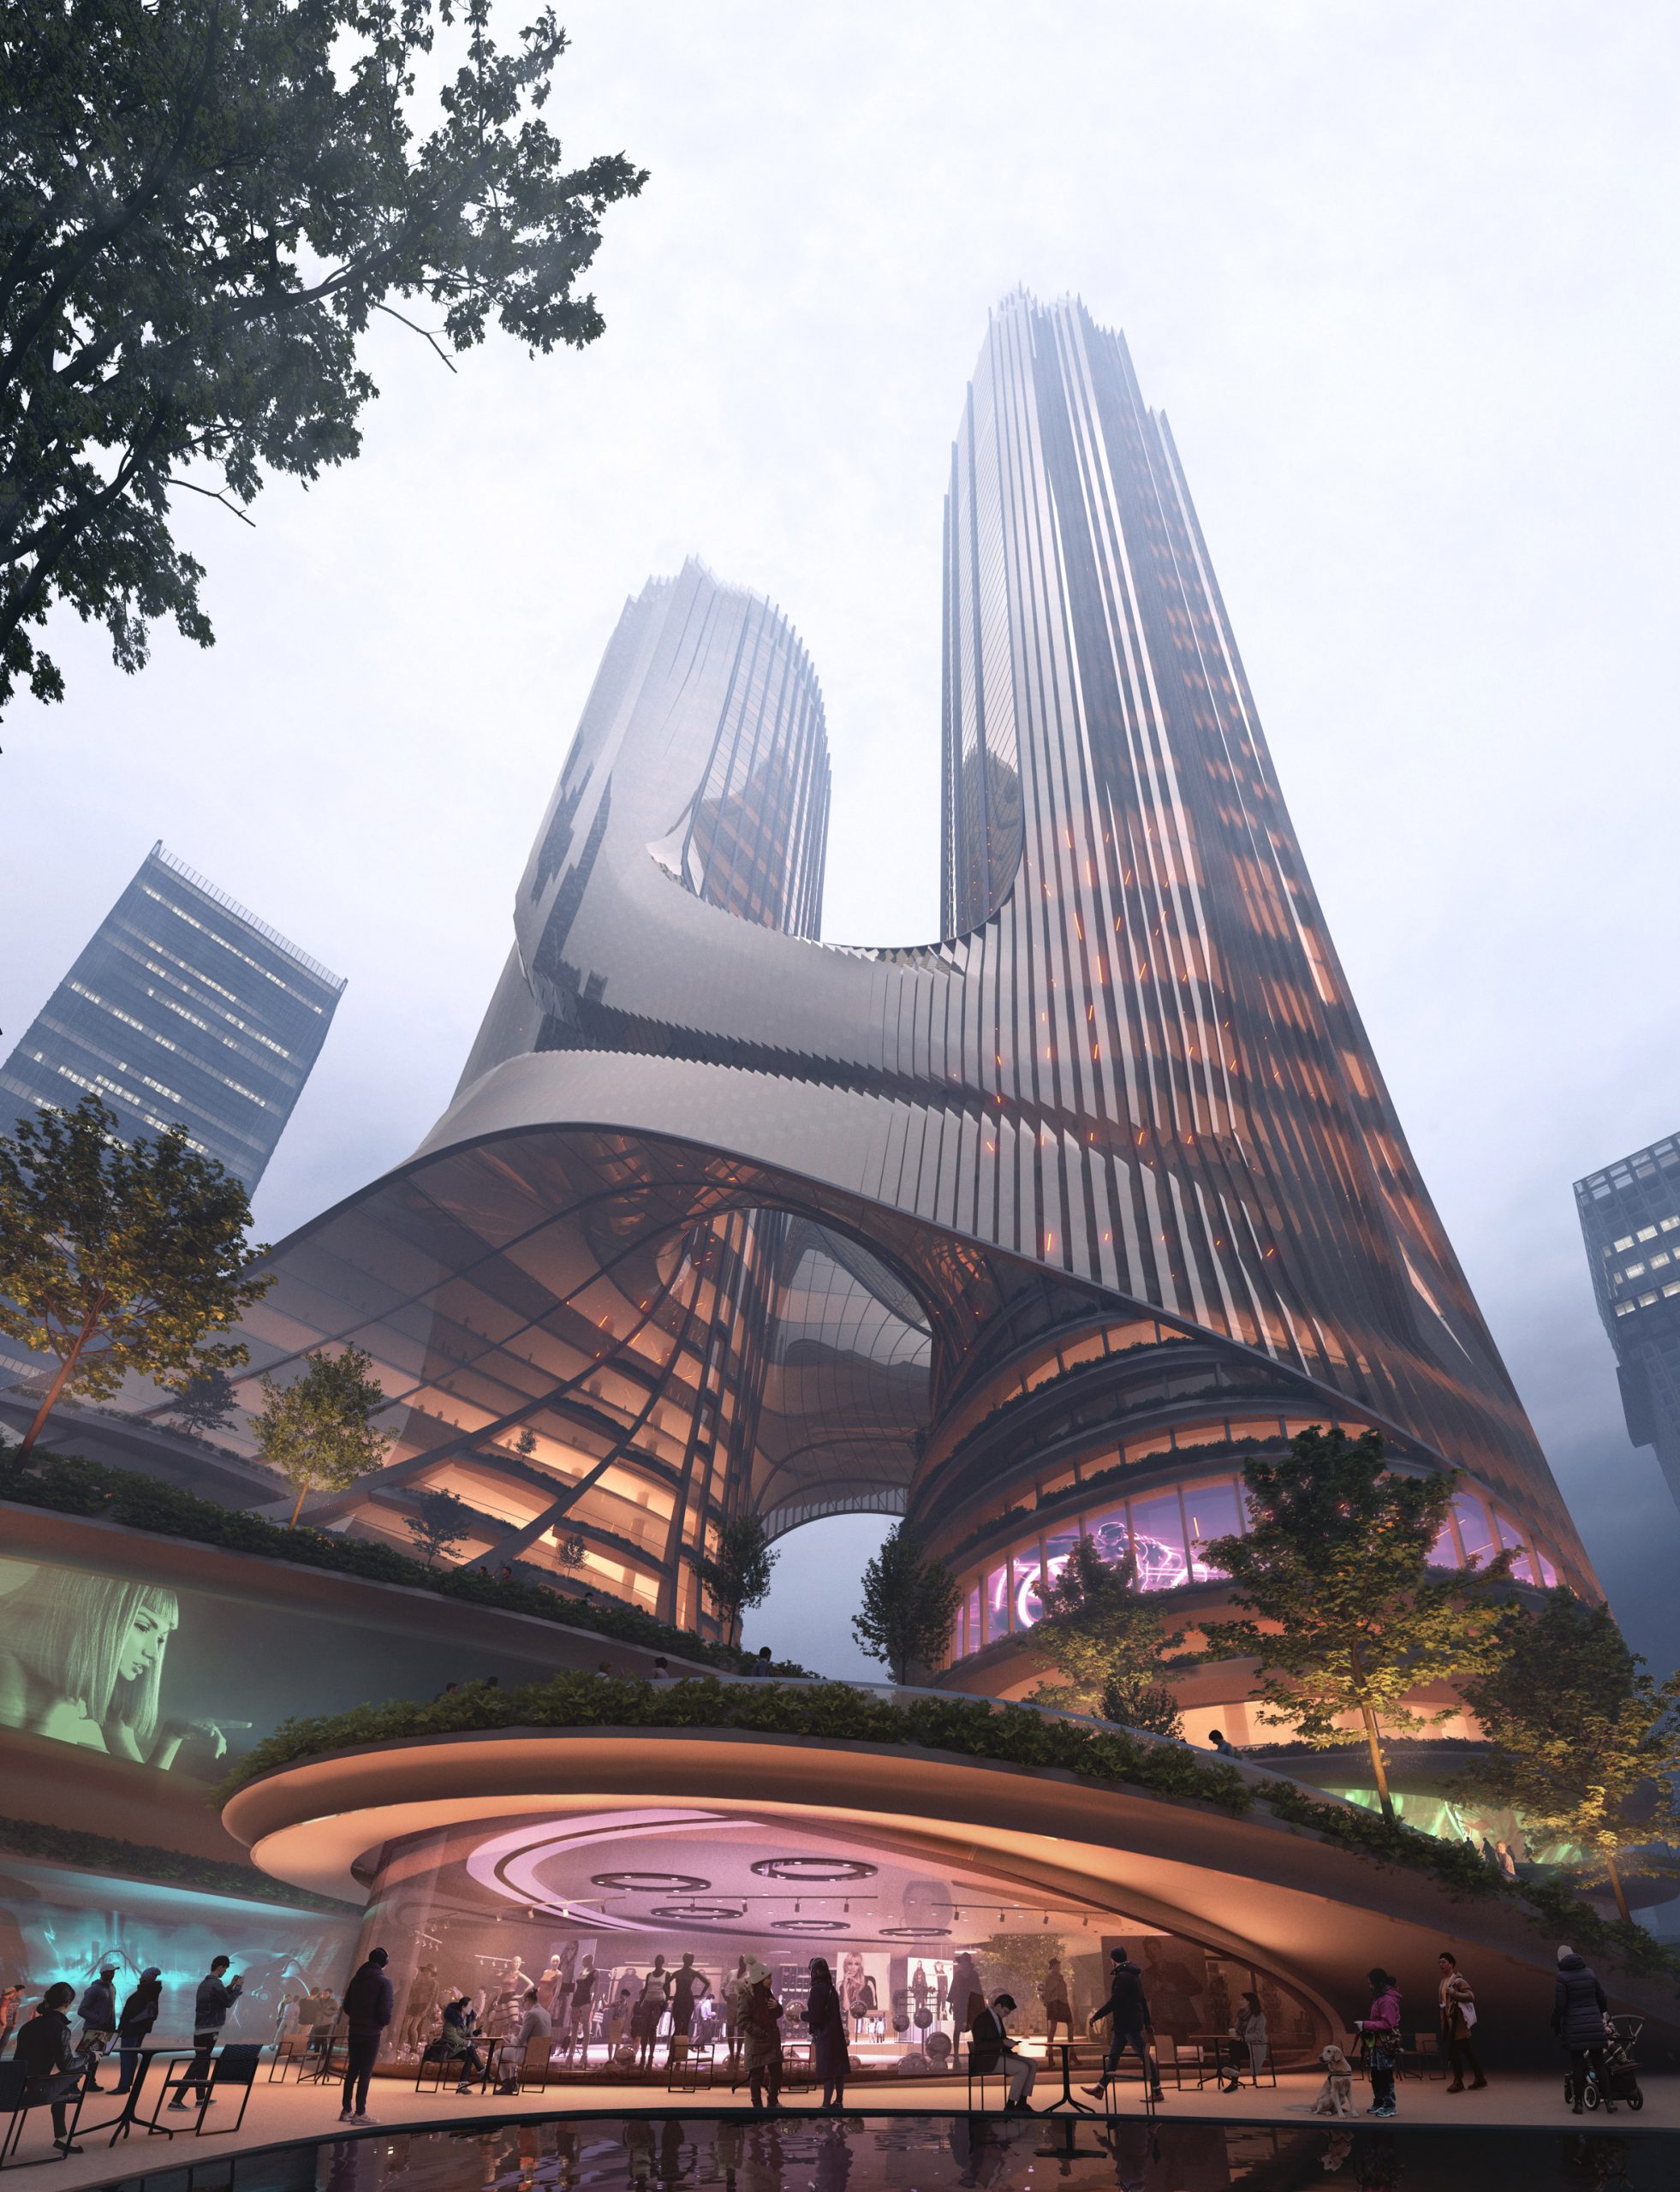 A visual from the terraces of Tower C by Zaha Hadid Architects in Shenzhen